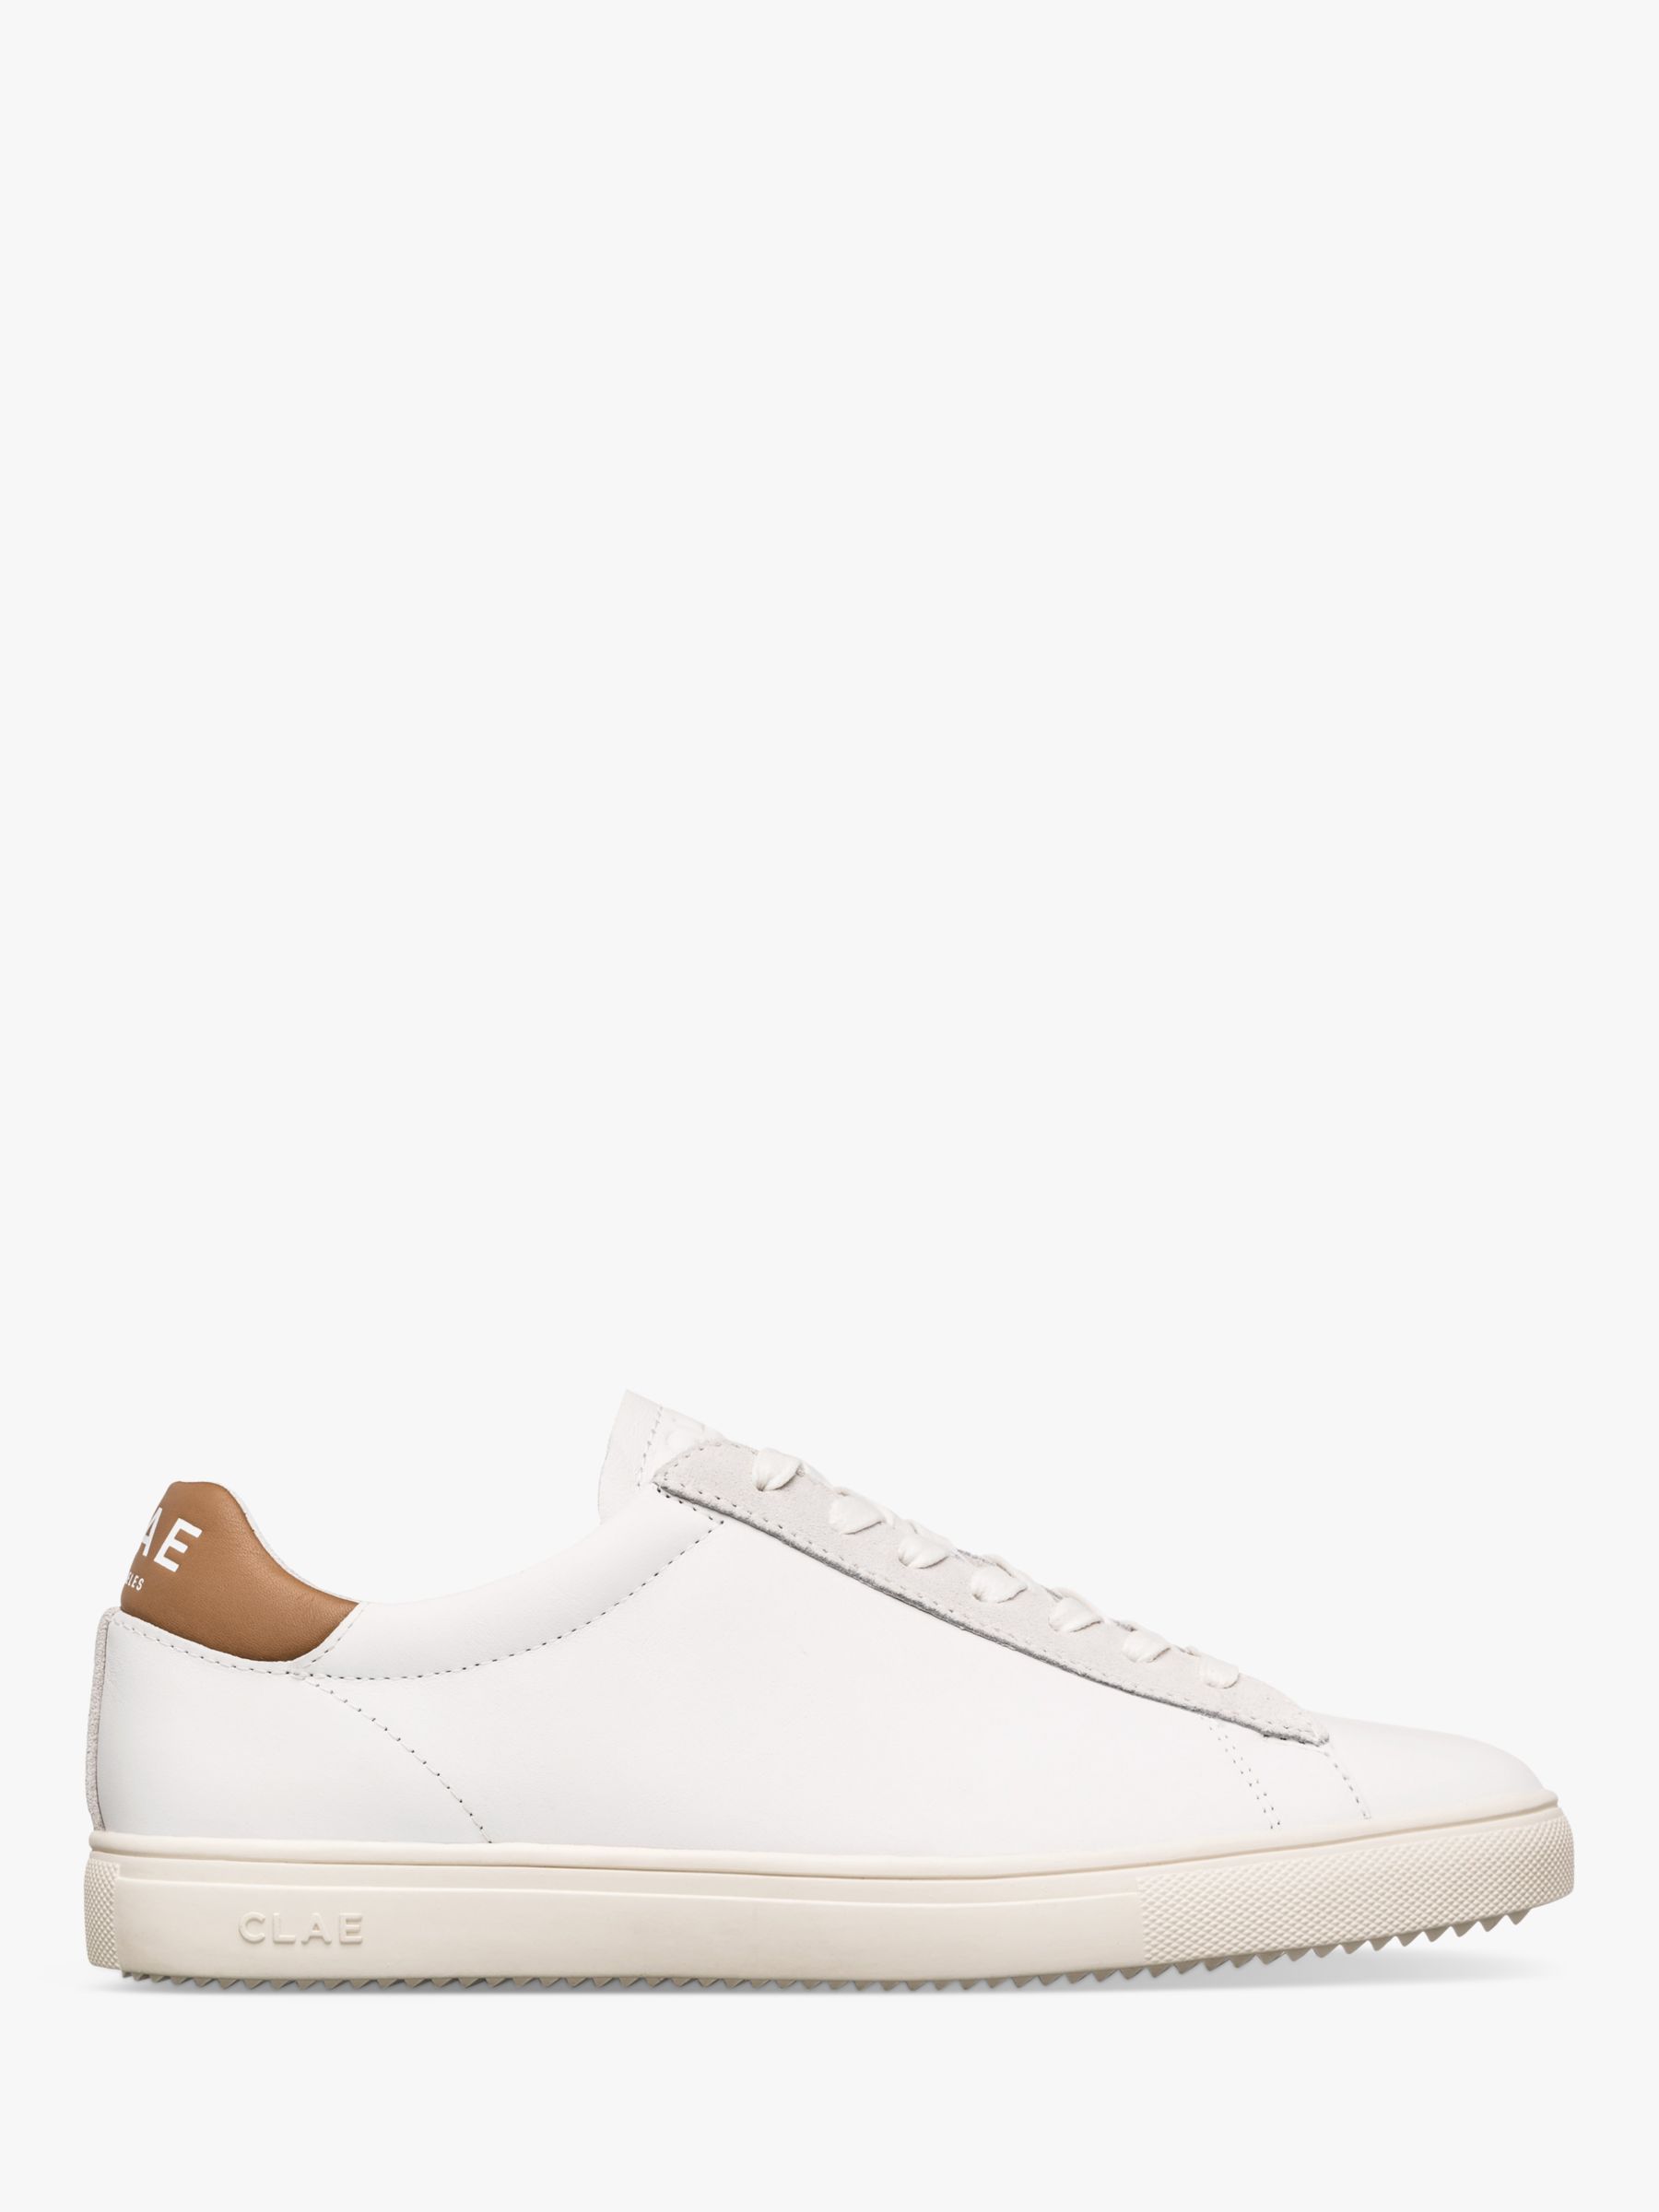 CLAE Bradley California Leather Lace Up Trainers at John Lewis & Partners